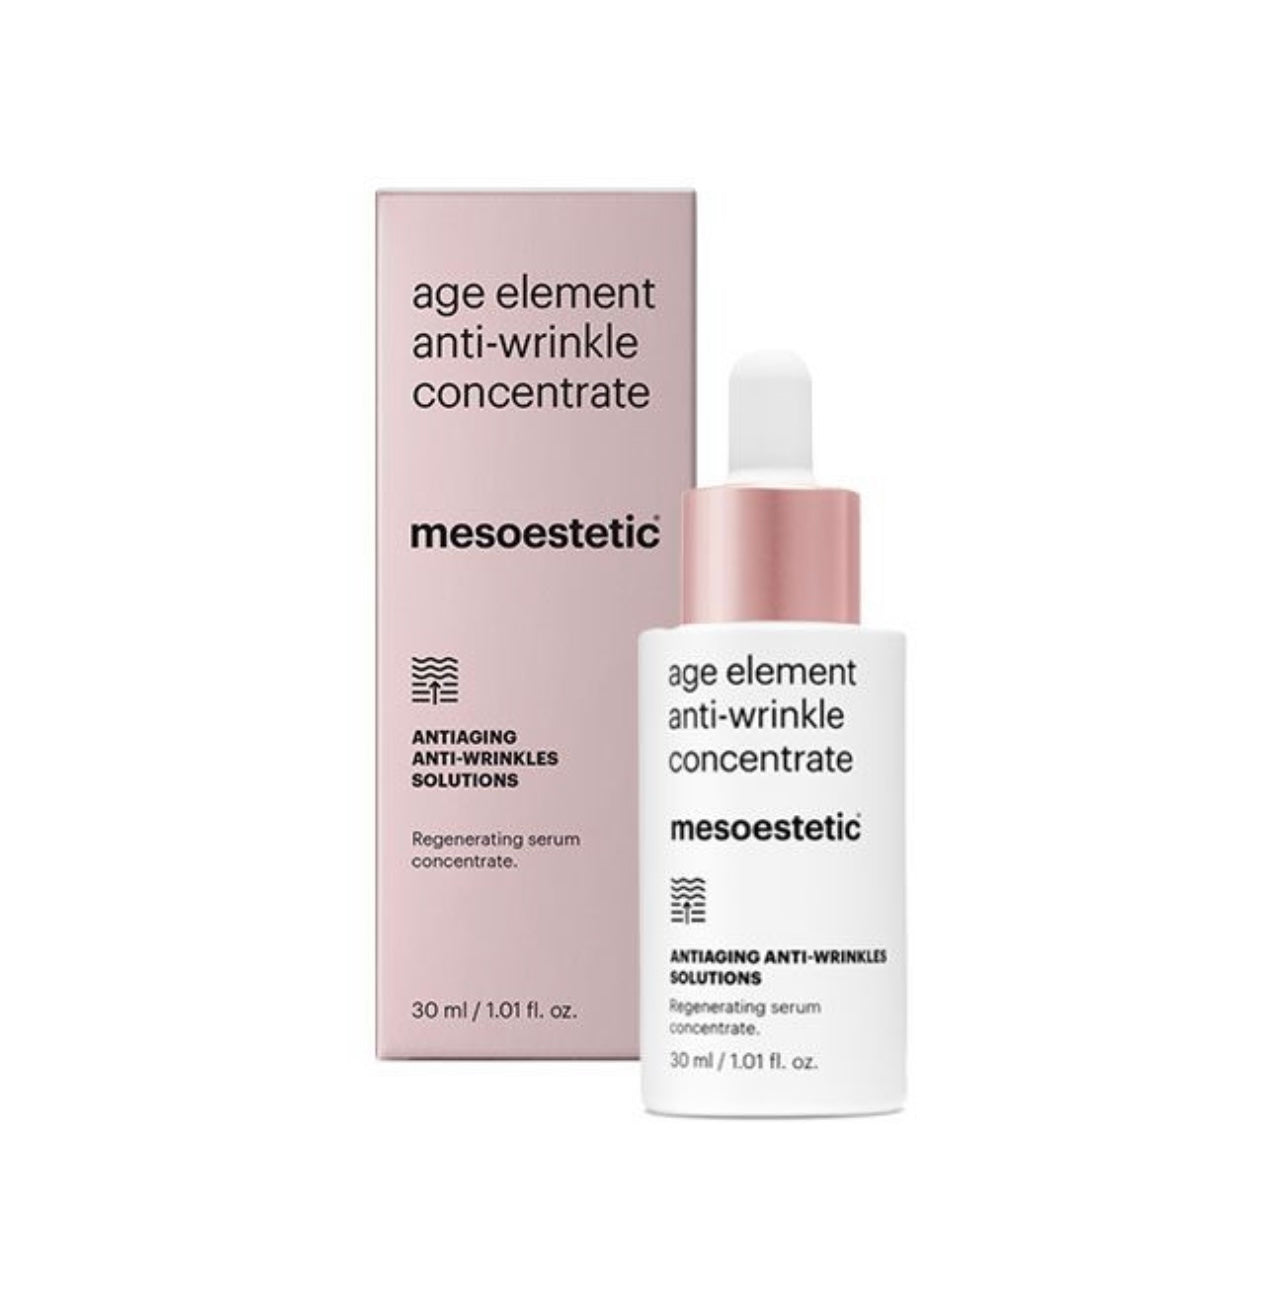 Age element® anti-wrinkle concentrate